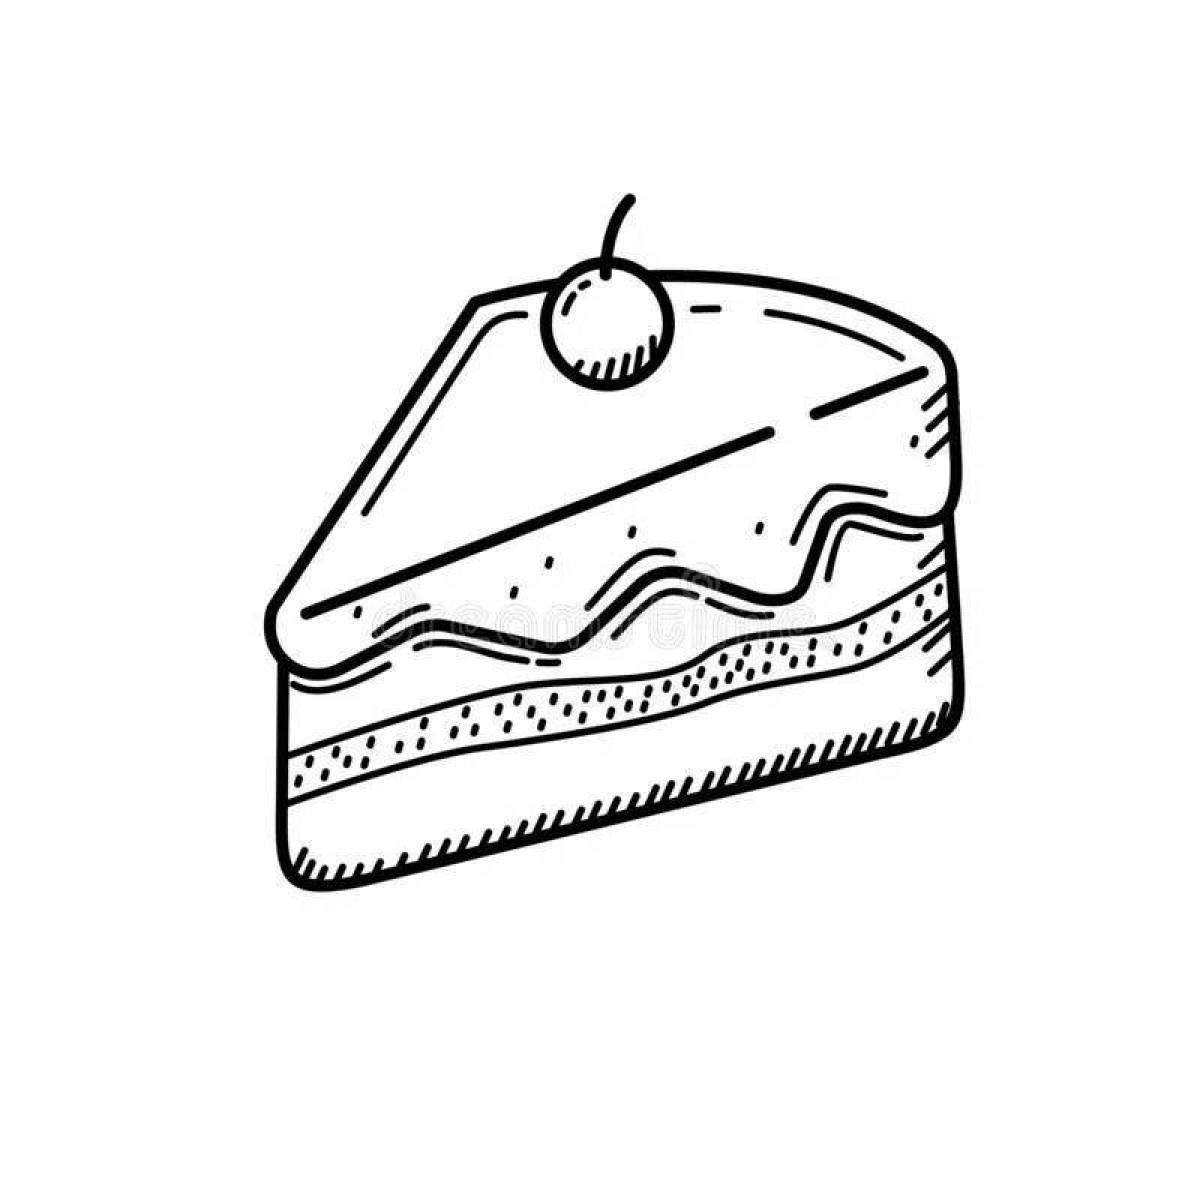 Amazing slice of pie coloring page